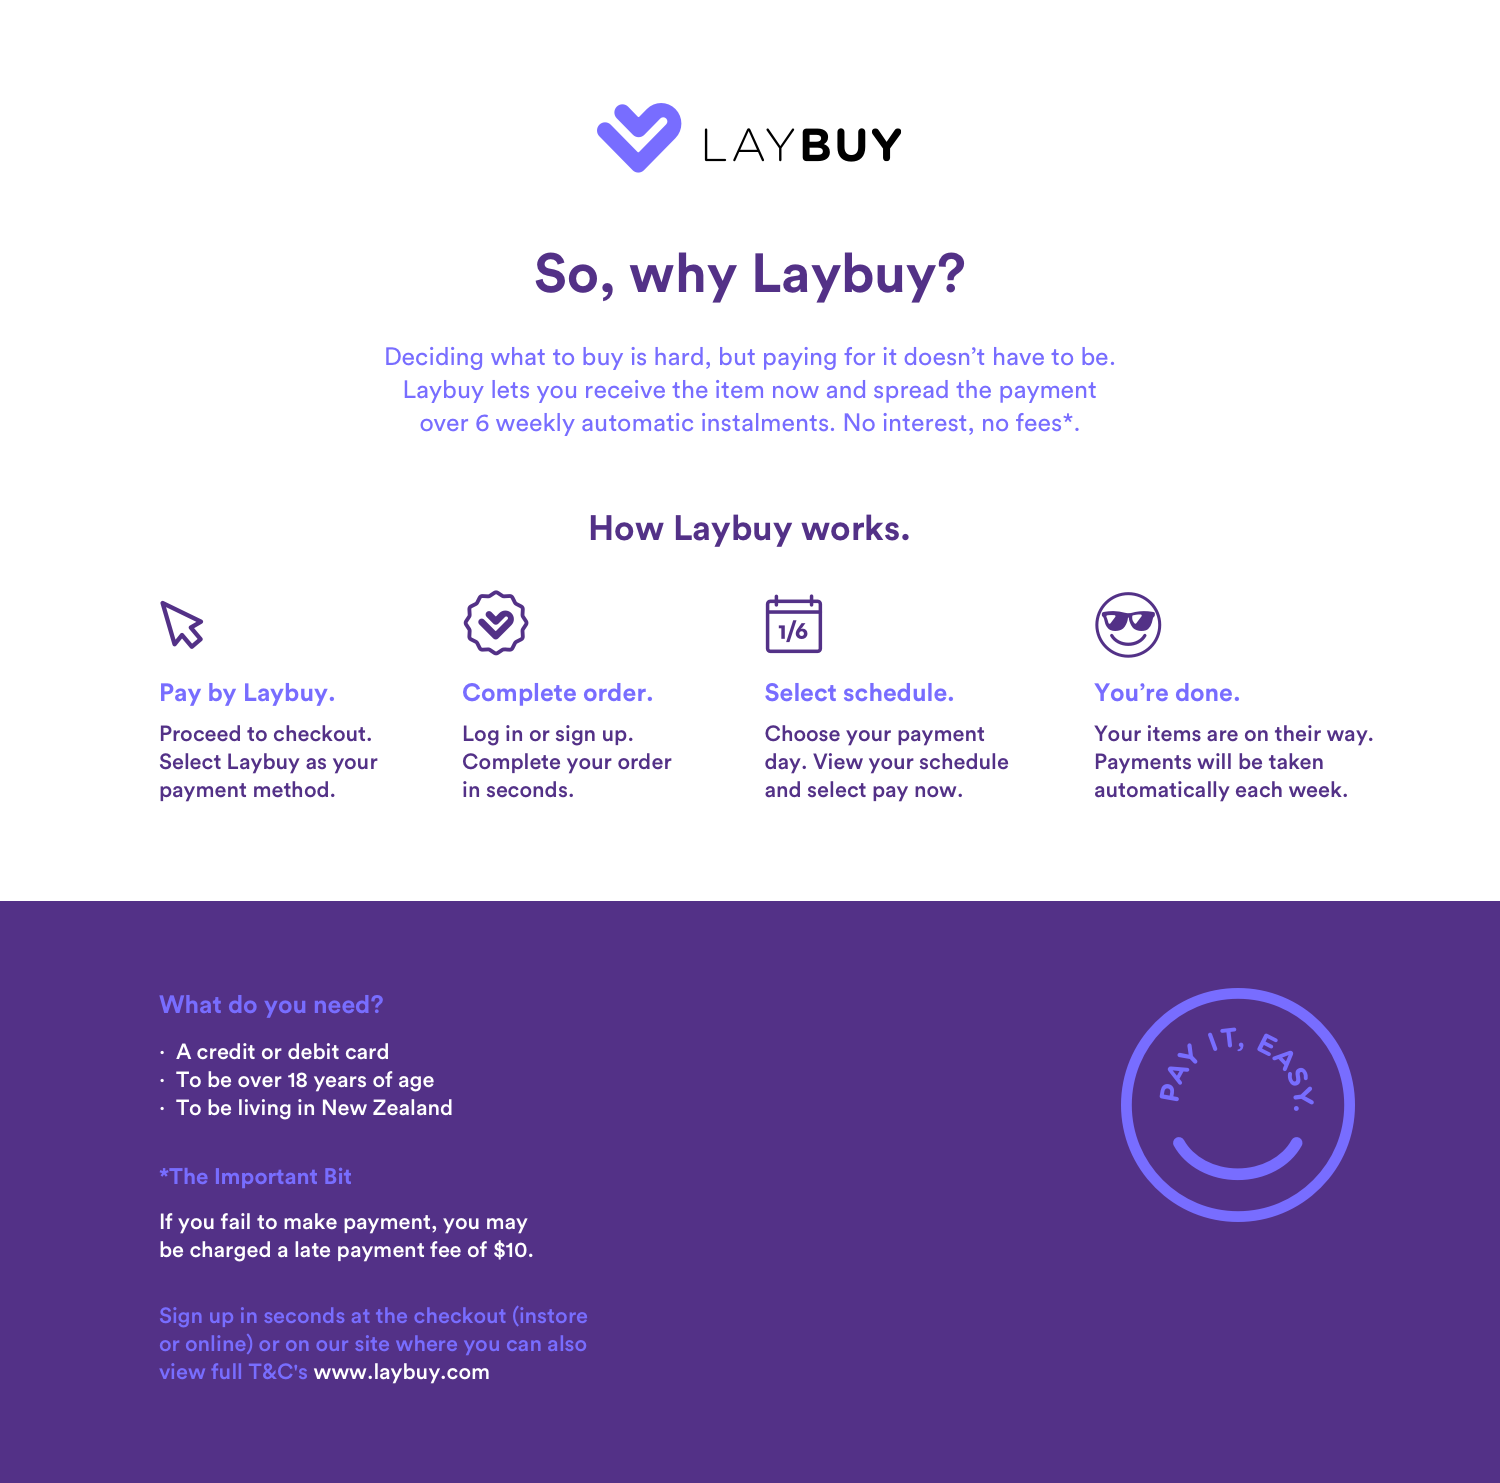 How Laybuy works